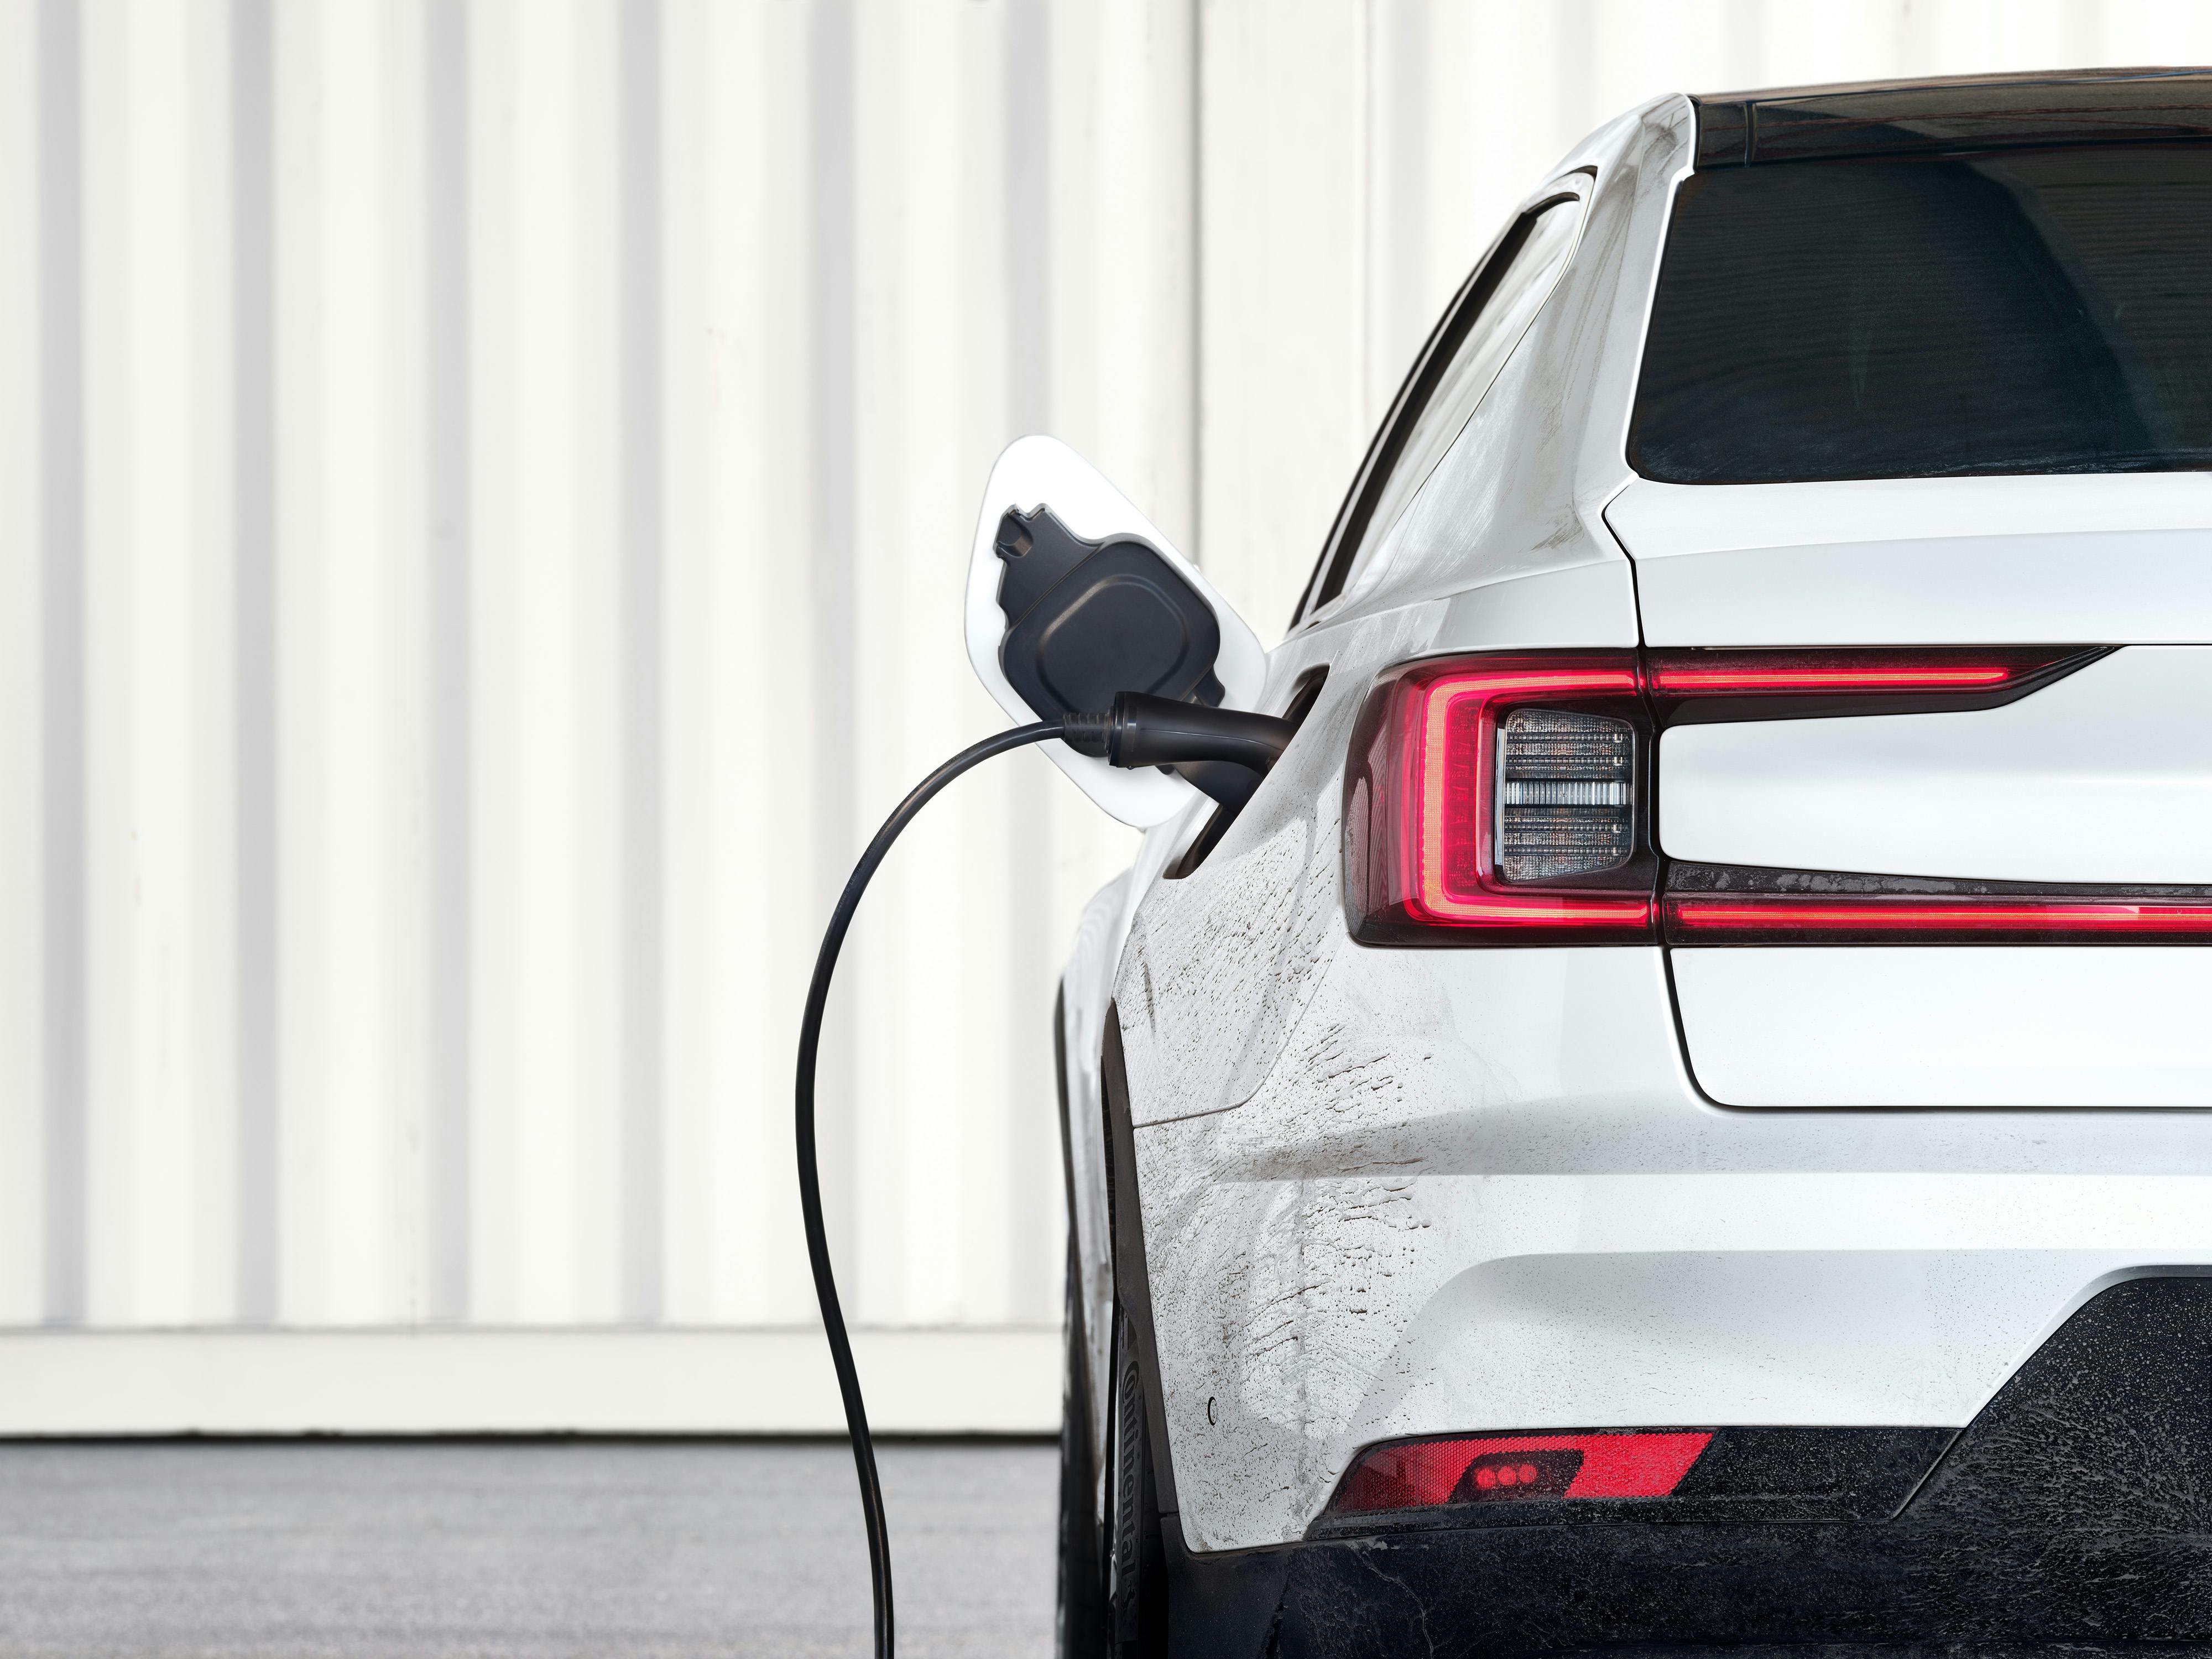 Rear view of the Polestar 2 with charging port connected to a charging station.